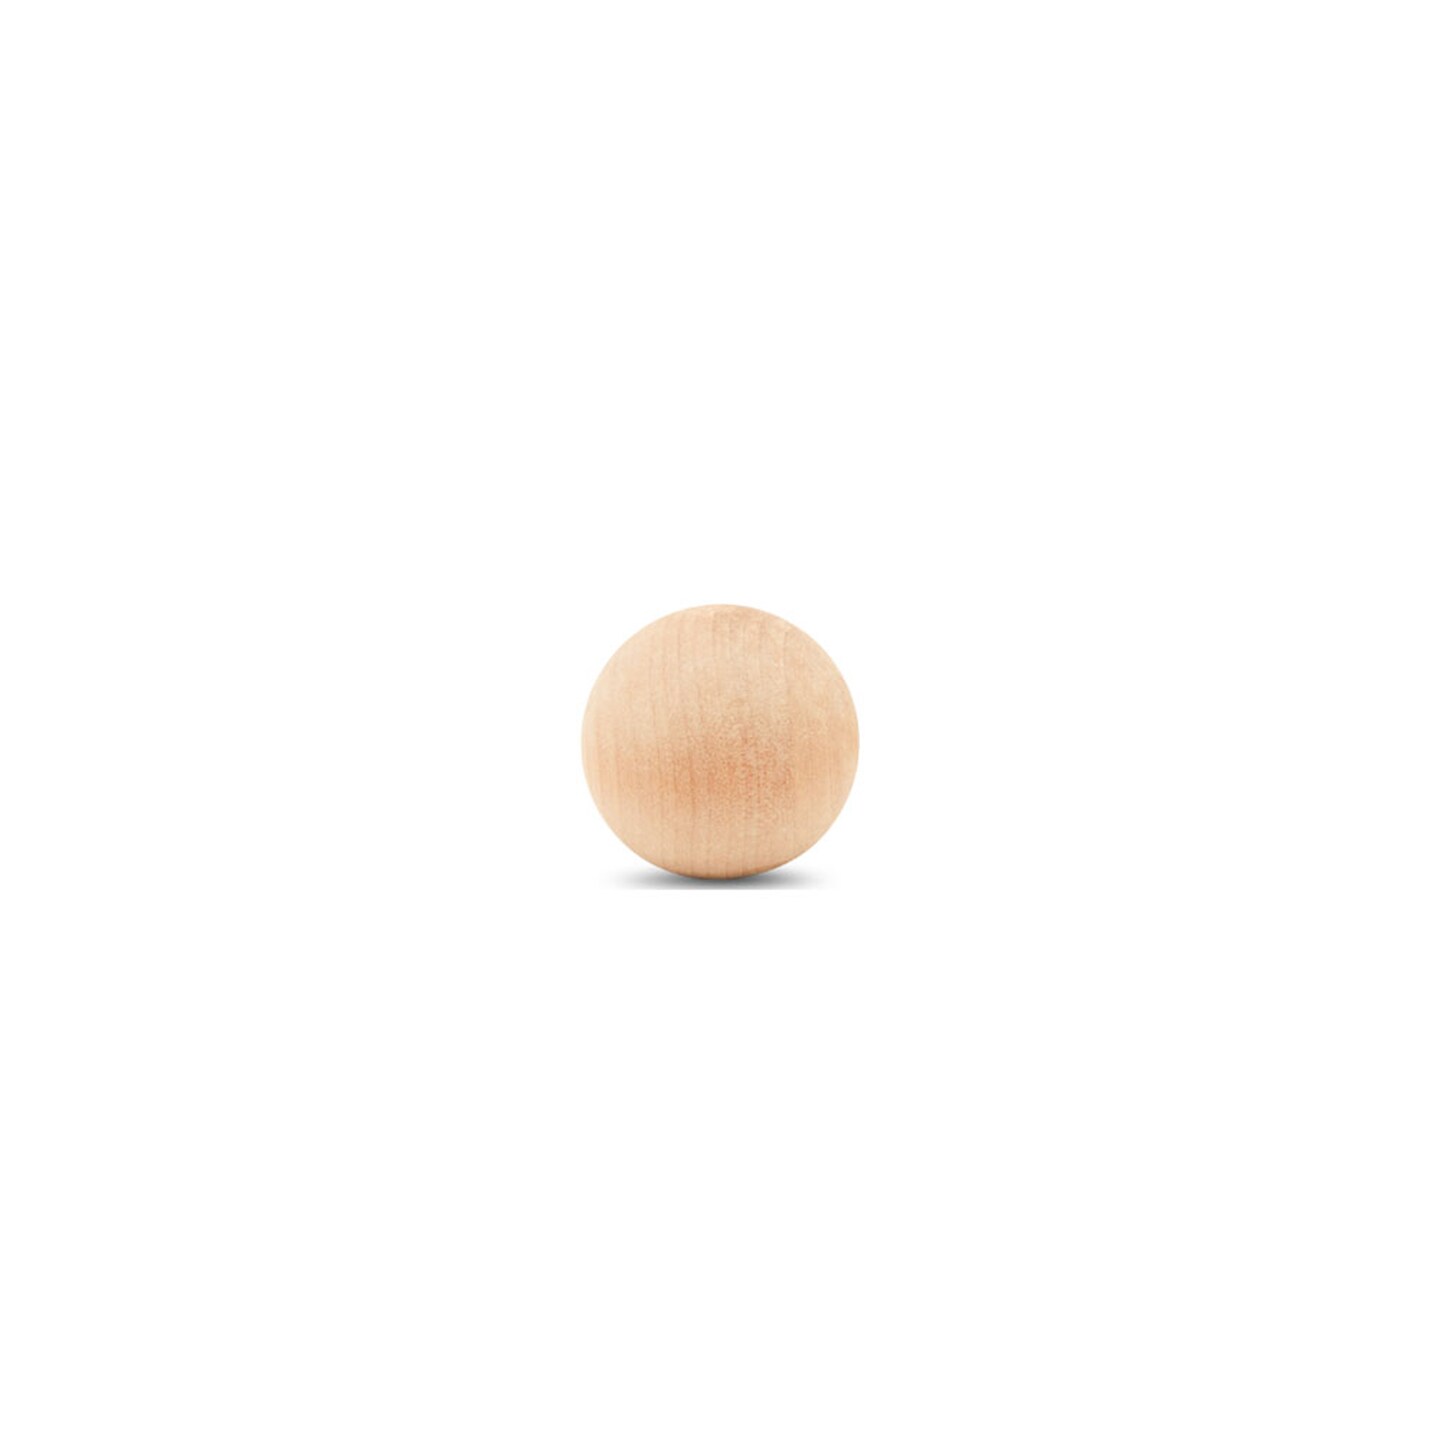 2-1/4 Inch Small Wood Balls, Pack of 10 Wooden Balls for Crafts and DIY  Project, Hardwood Birch Wood Balls, by Woodpeckers